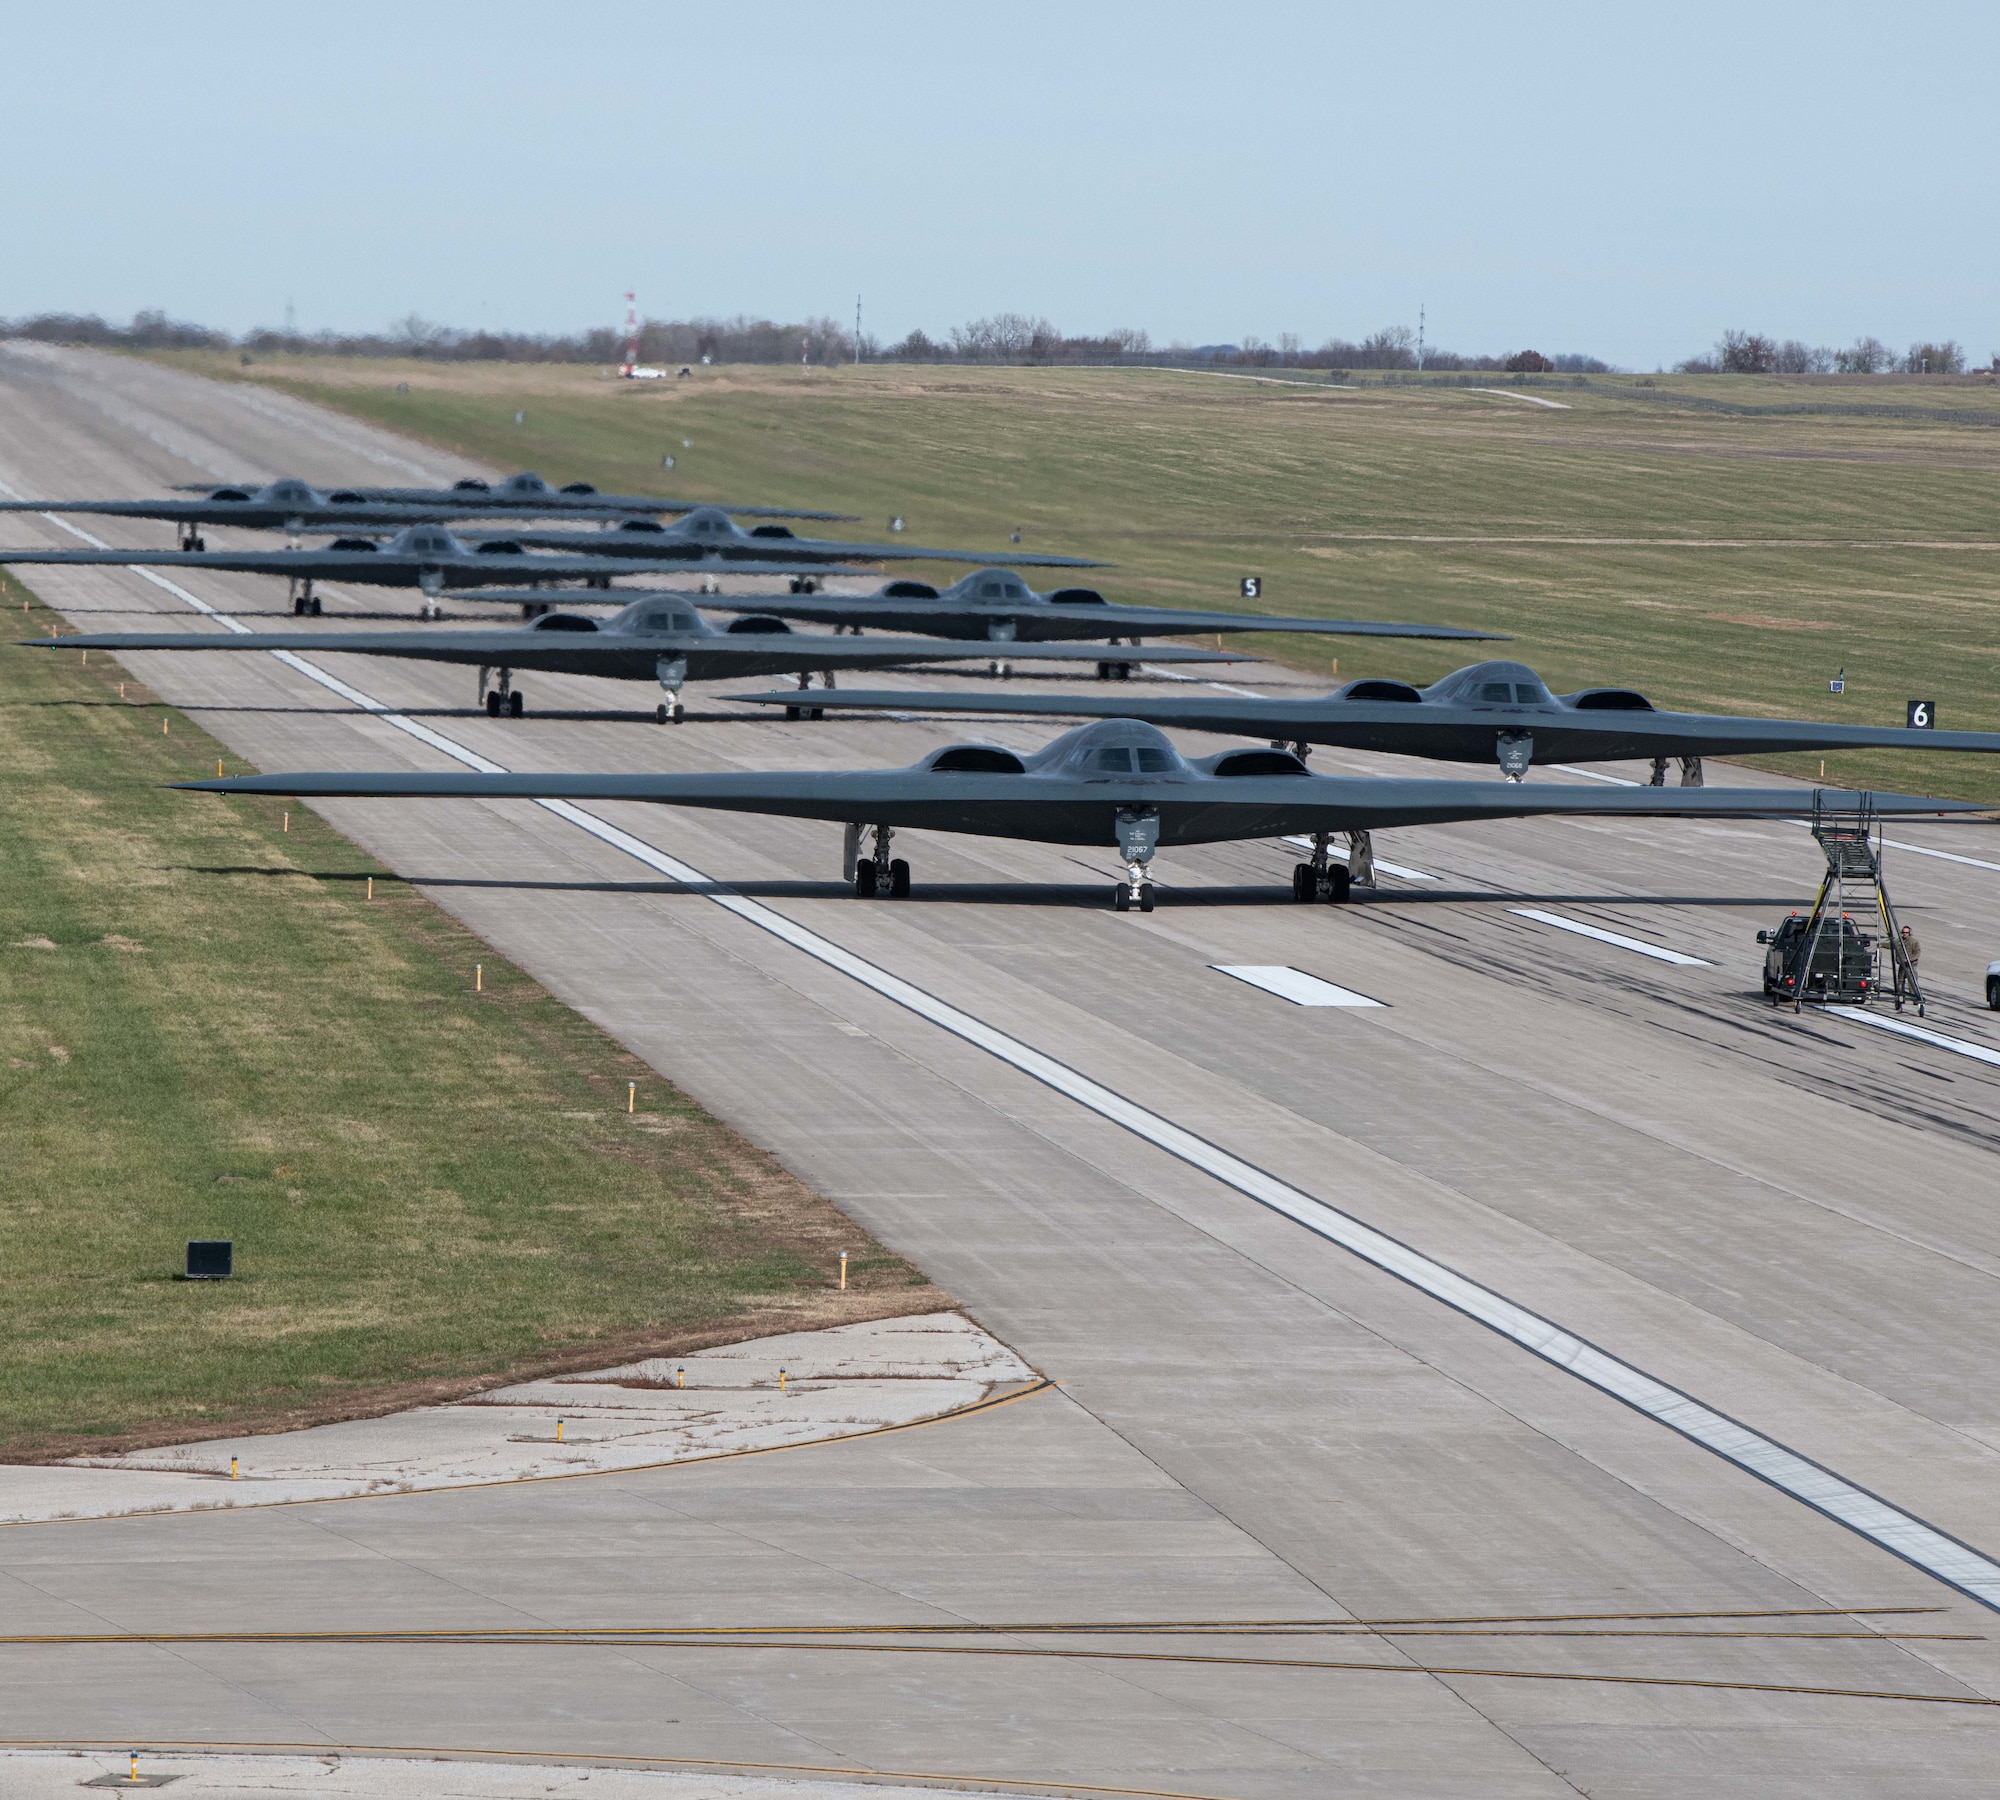 B-2 Spirit stealth bombers assigned to Whiteman Air Force Base taxi and take-off during exercise Spirit Vigilance on Whiteman Air Force Base, Missouri November 7, 2022. Routine exercises like Spirit Vigilance assure our allies and partners that Whiteman Air Force Base is ready to execute nuclear operations and global strike anytime, anywhere. (U.S. Air Force photo by Airman 1st Class Bryson Britt)